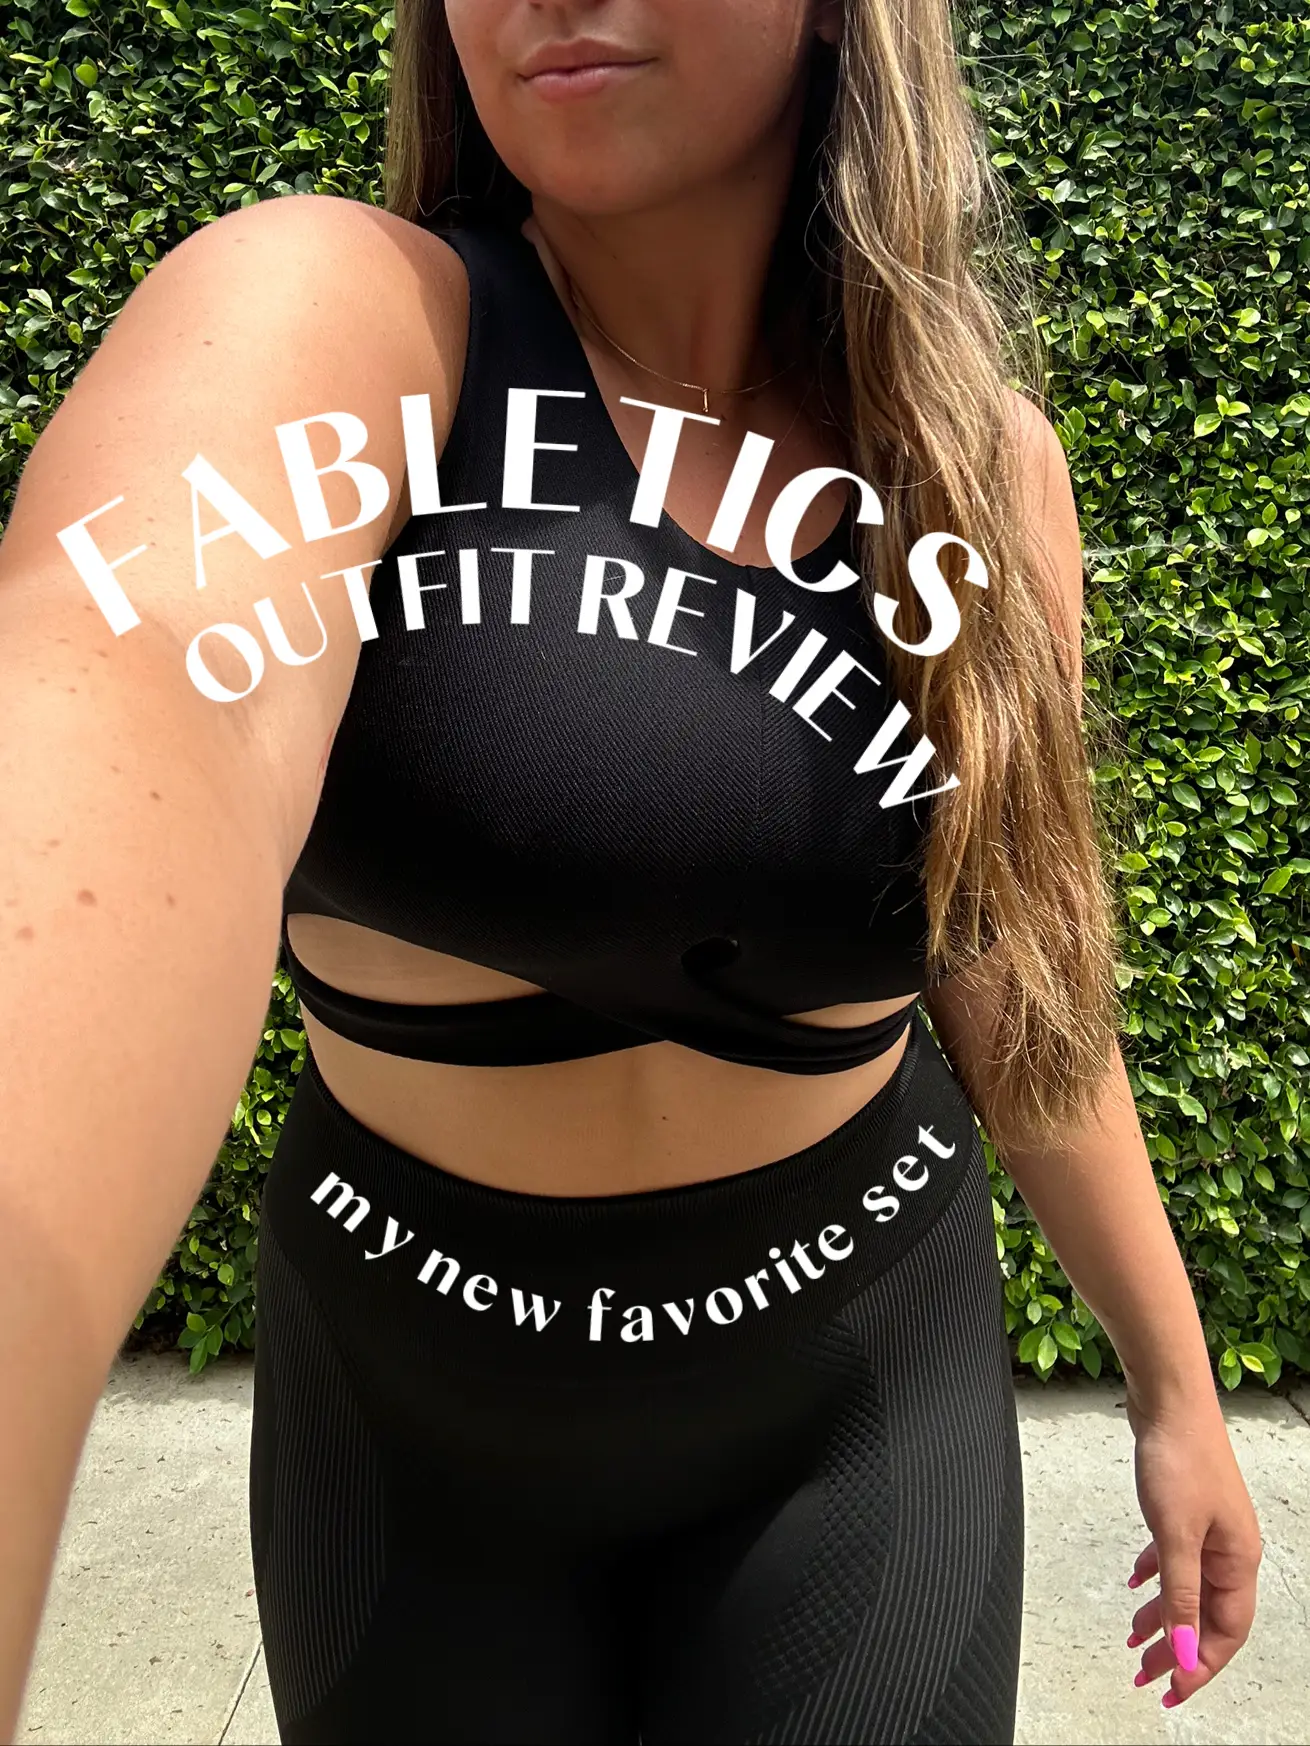 For my workout today, I'm wearing our @fabletics Mesh Breathable Medium  Impact Sports Bra with the Motion 365+ High-Waisted Legging in